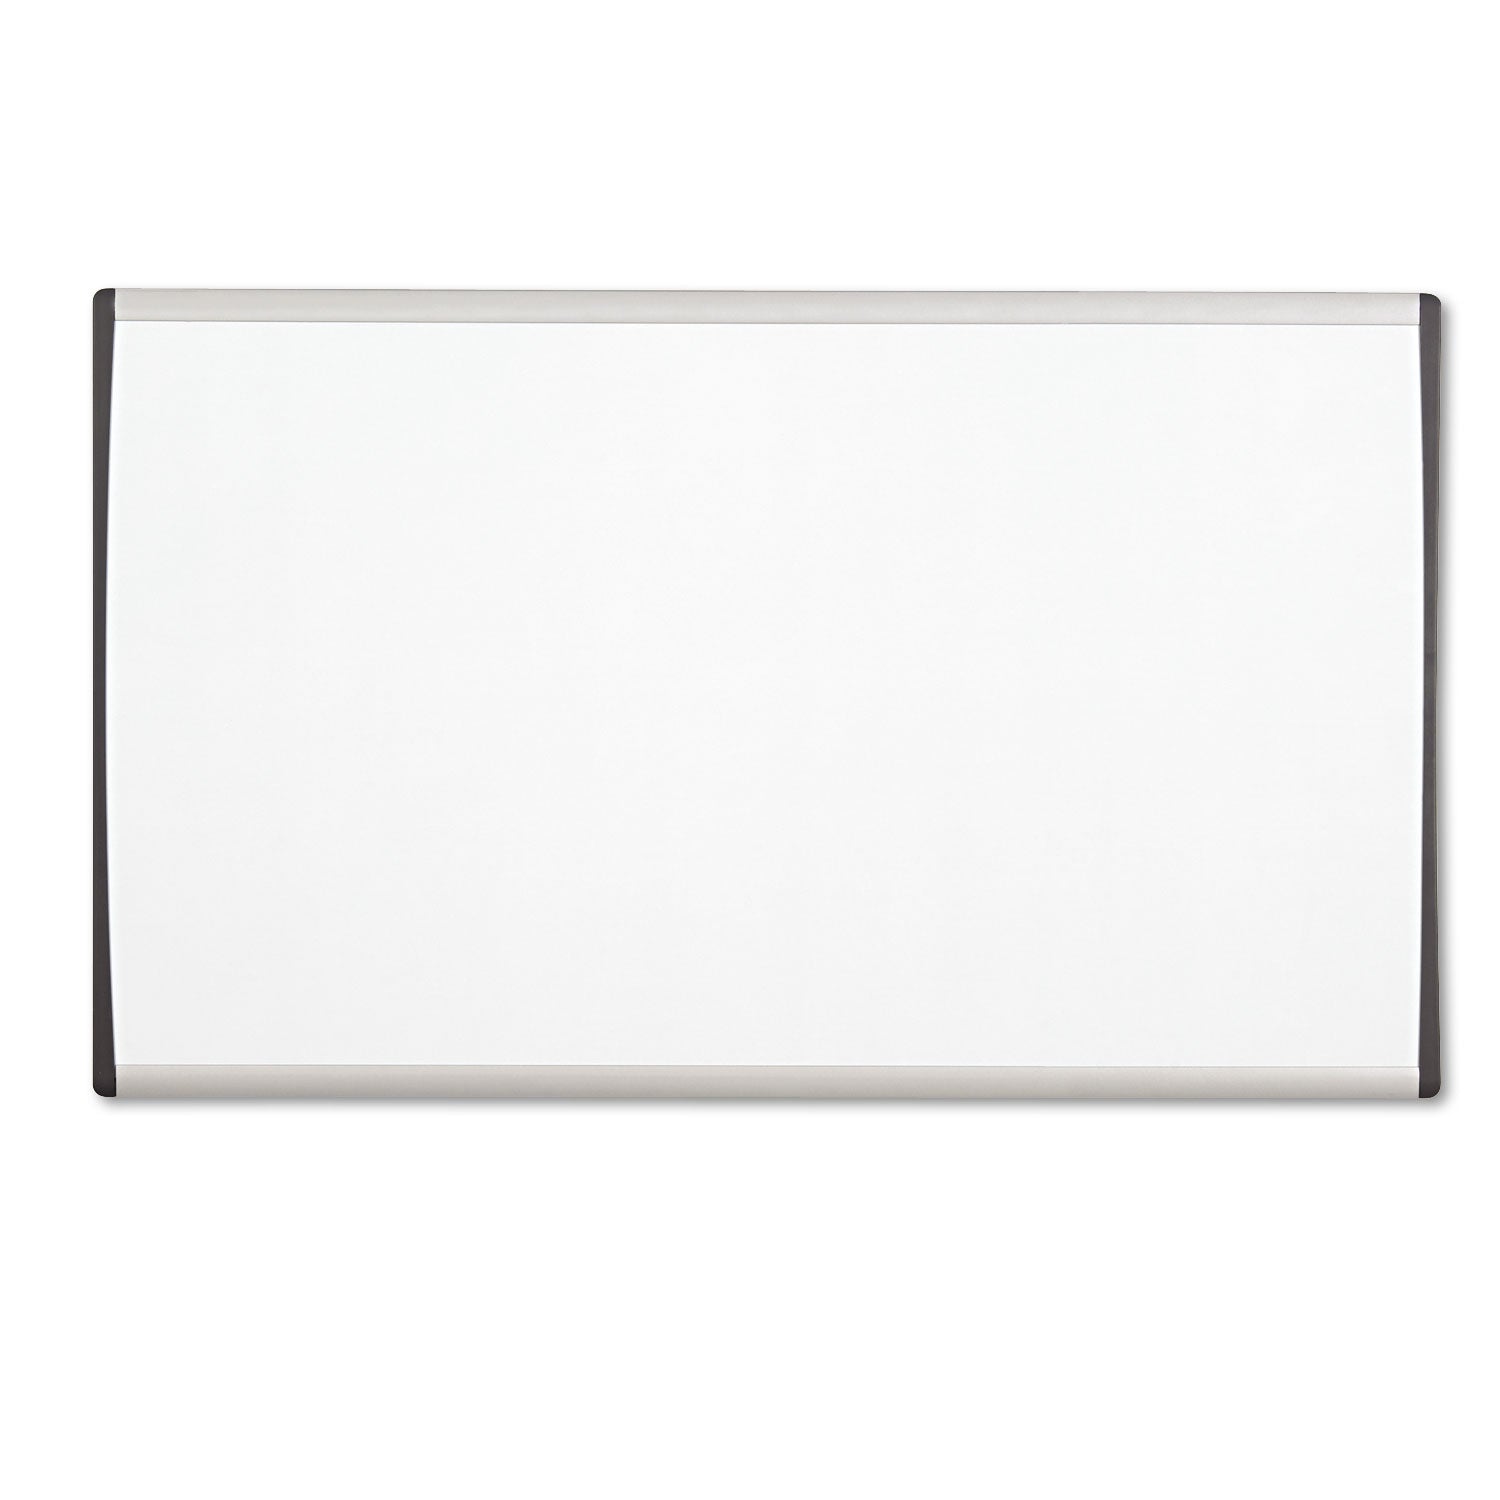 ARC Frame Cubicle Magnetic Dry Erase Board, 30 x 18, White Surface, Silver Aluminum Frame - 